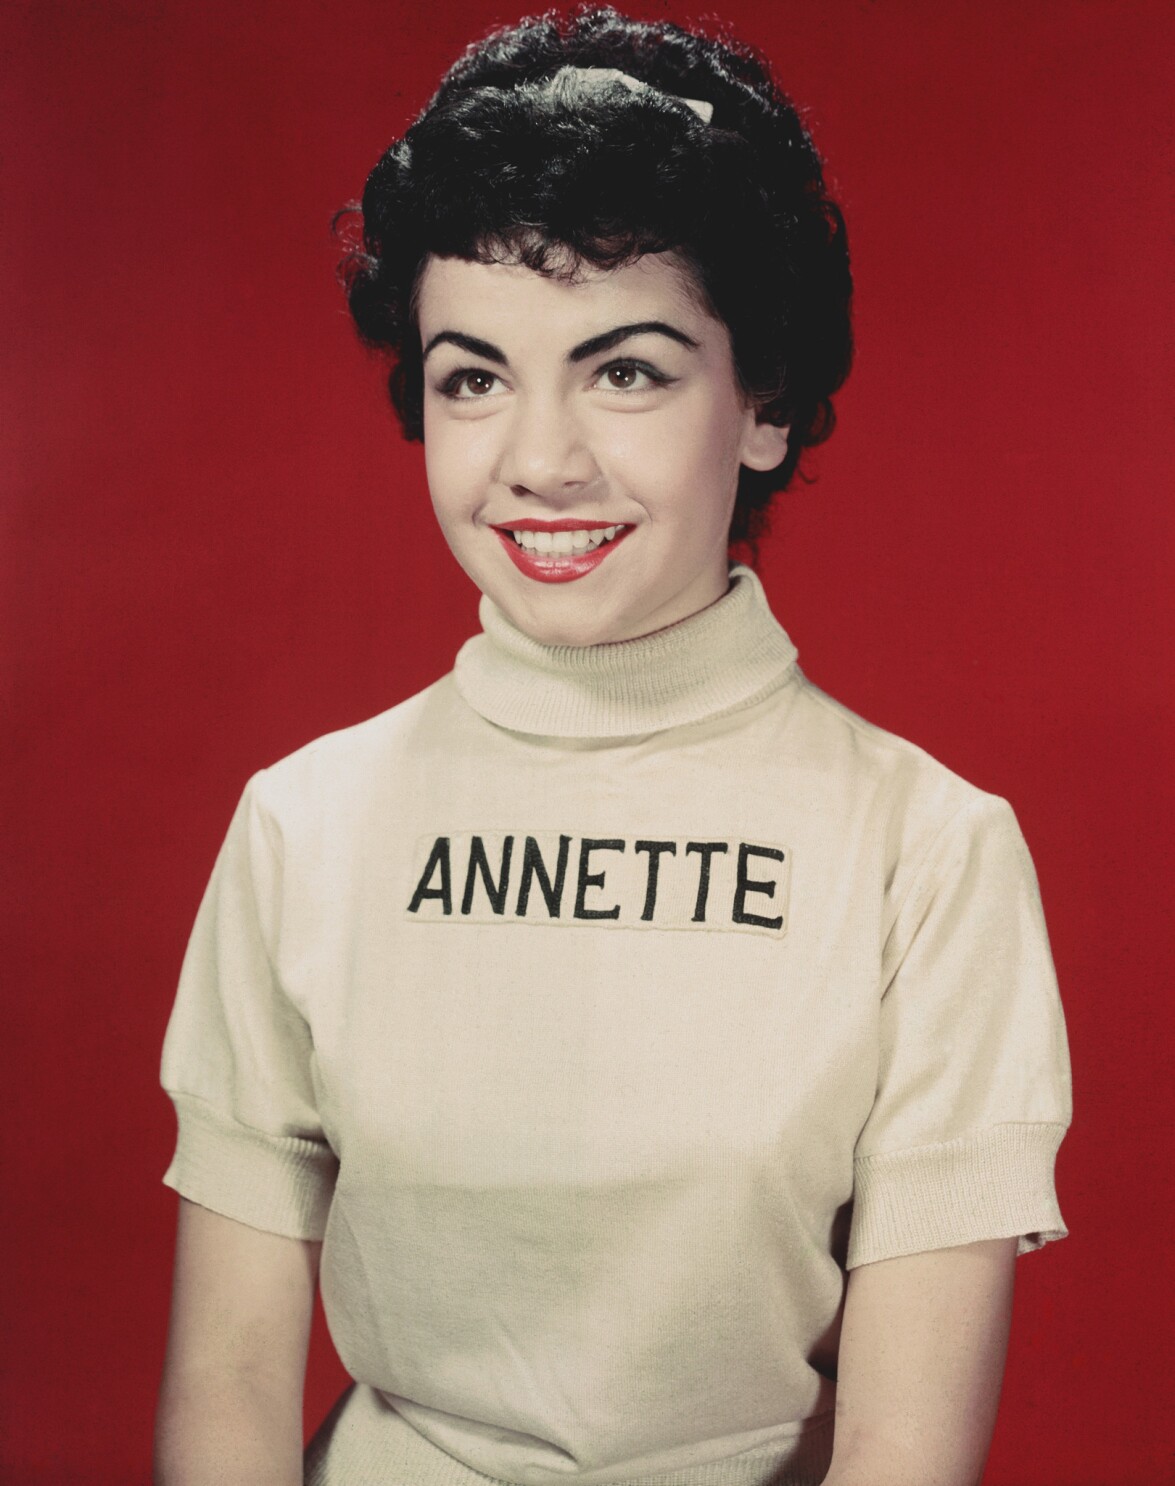 Annette pictures funicello of Jack L.